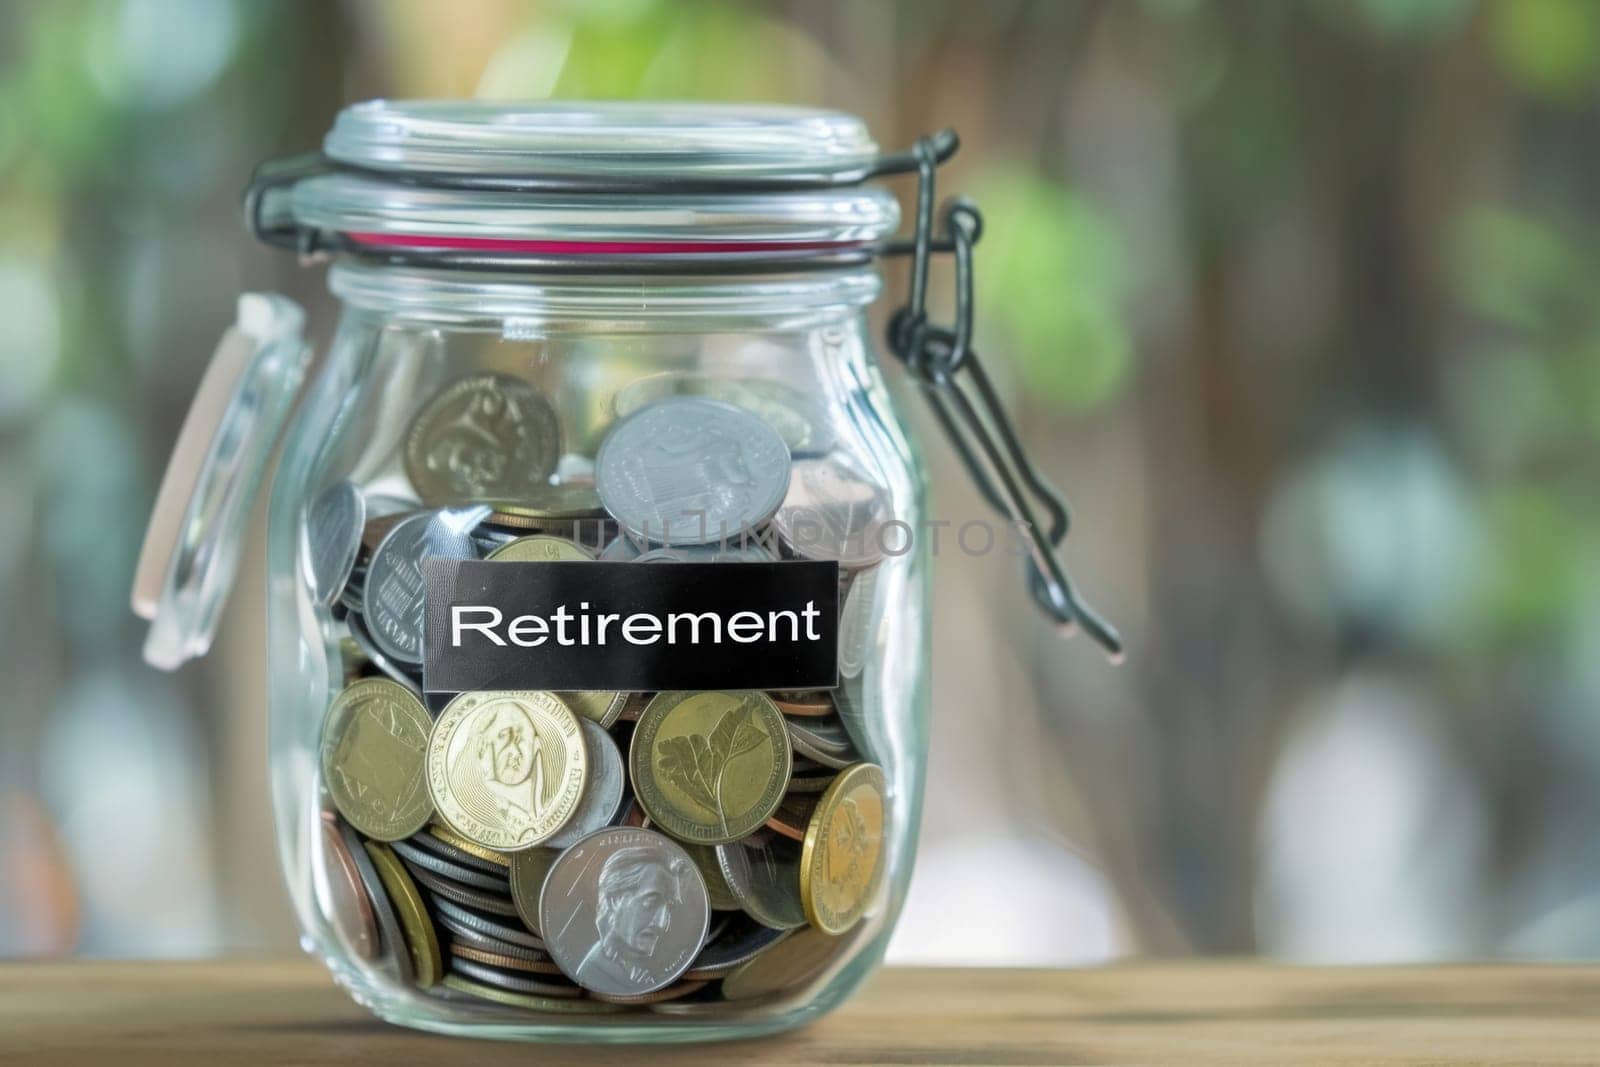 A clear jar labeled 'Retirement', filled with coins, against a blurred green background, representing financial planning